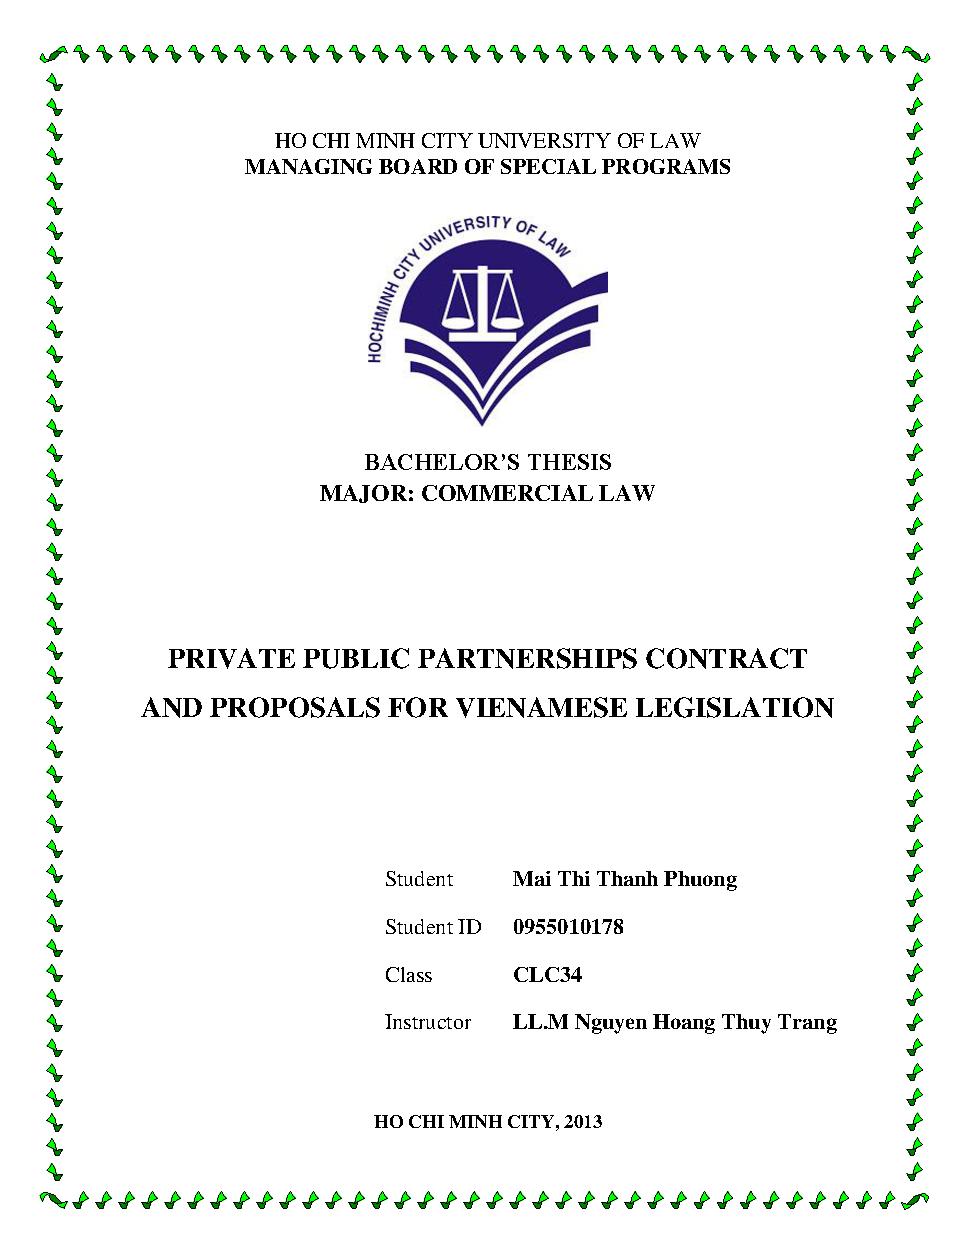 Private public partnerships contract and proposals for vietnamese legislation